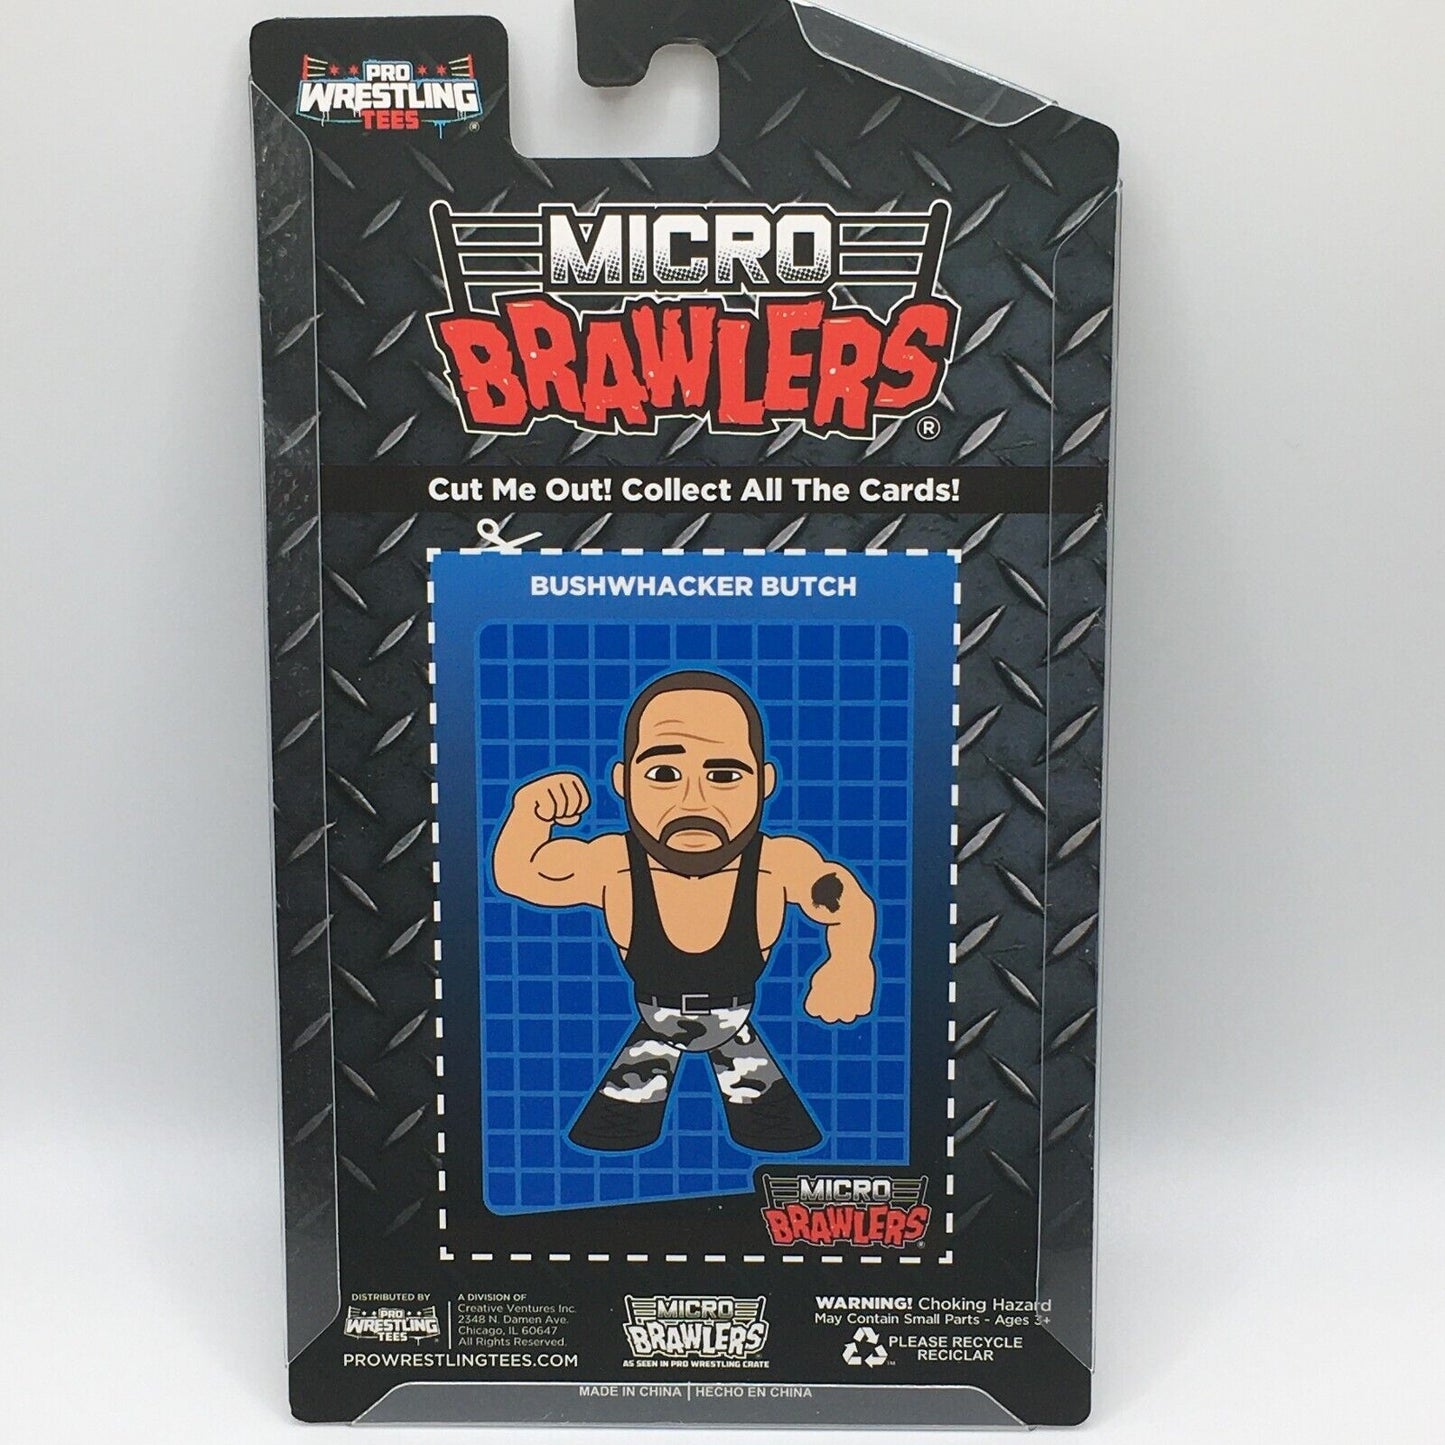 2022 Pro Wrestling Tees Micro Brawlers Limited Edition The Bushwhackers: Luke & Butch